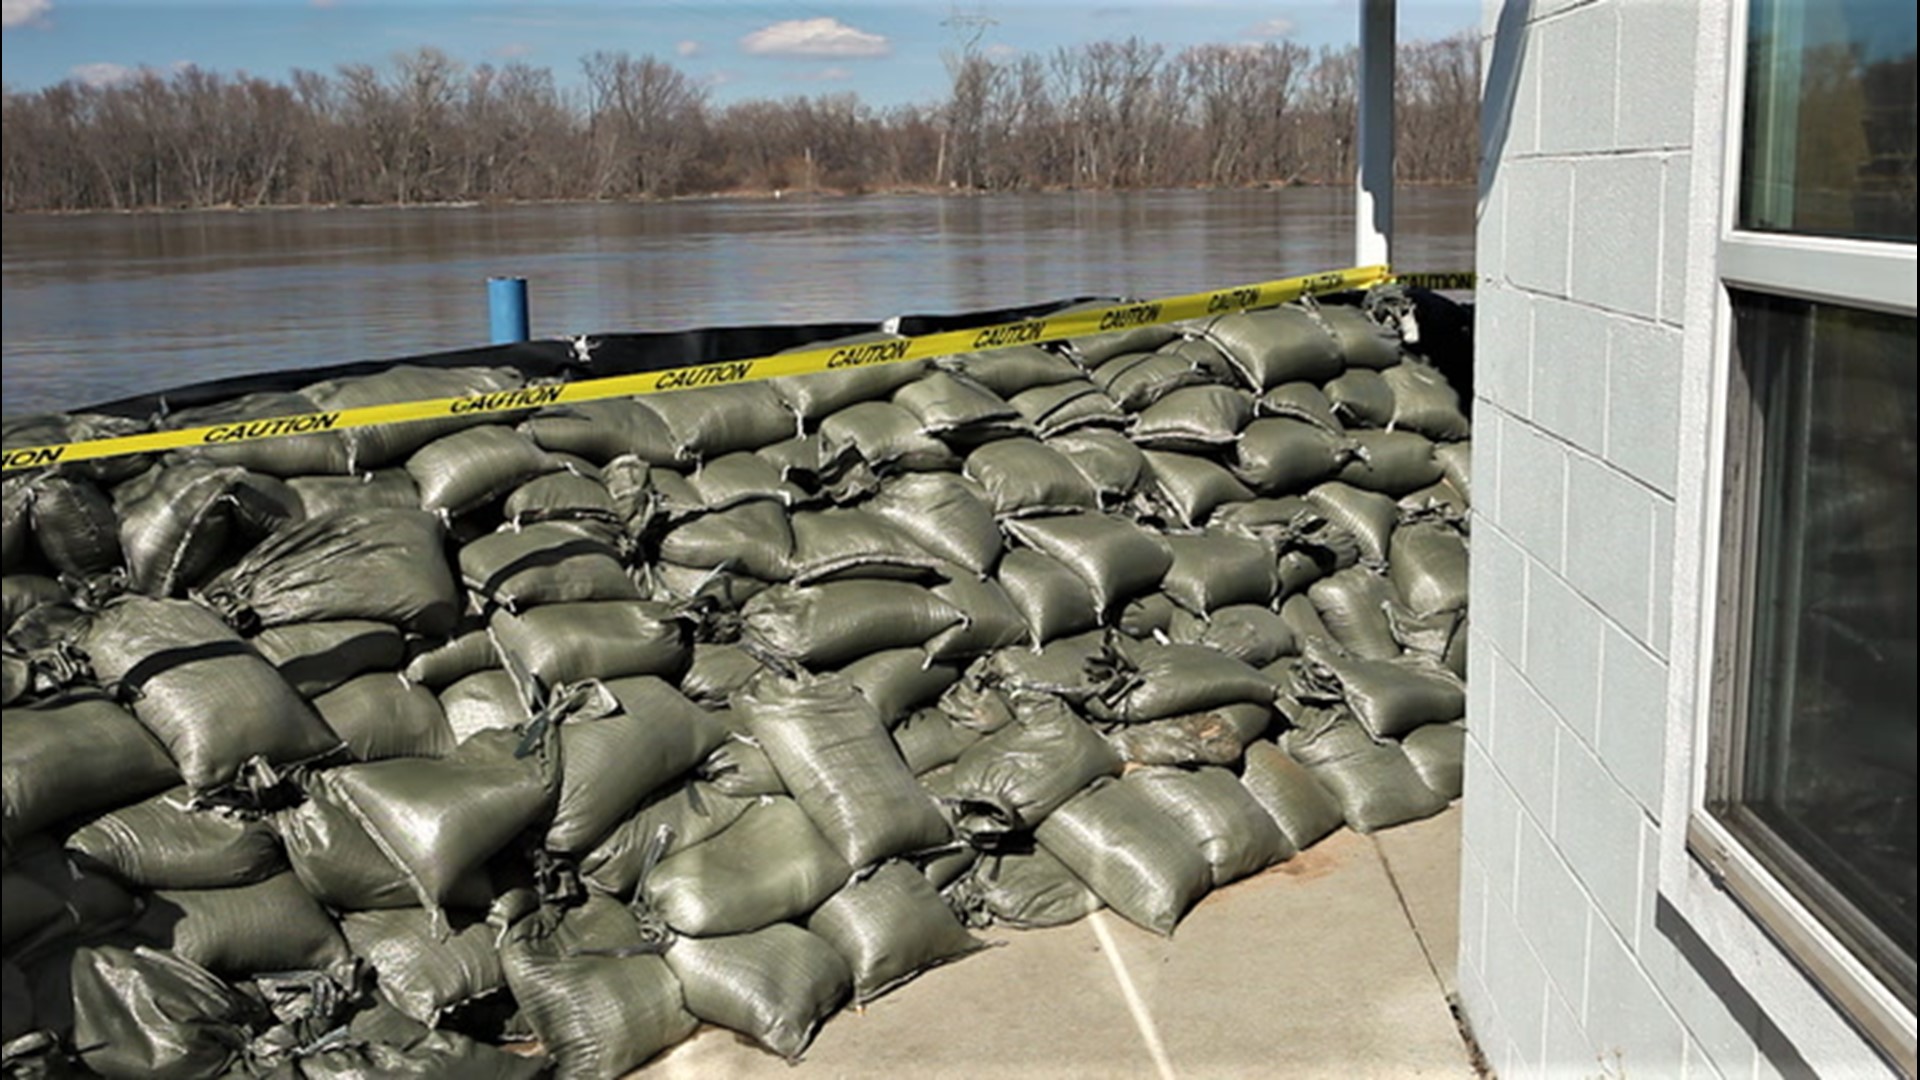 It's common to see homes barricaded with sandbags in anticipation of severe flooding. Why are sandbags used and what makes them so effective?